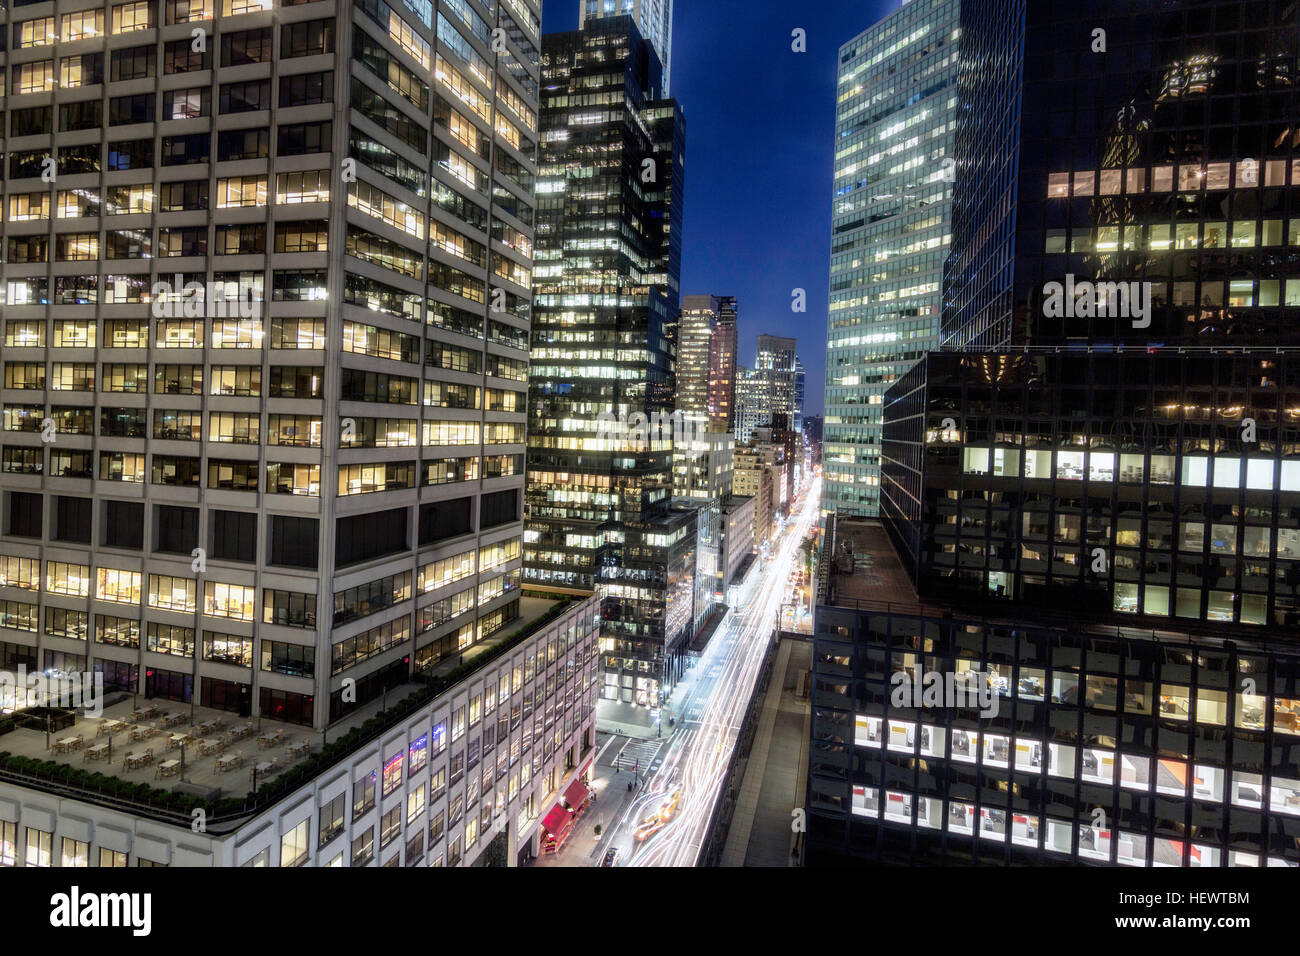 Elevated view of glass fronted skyscrapers illuminated at night, New York, USA Stock Photo